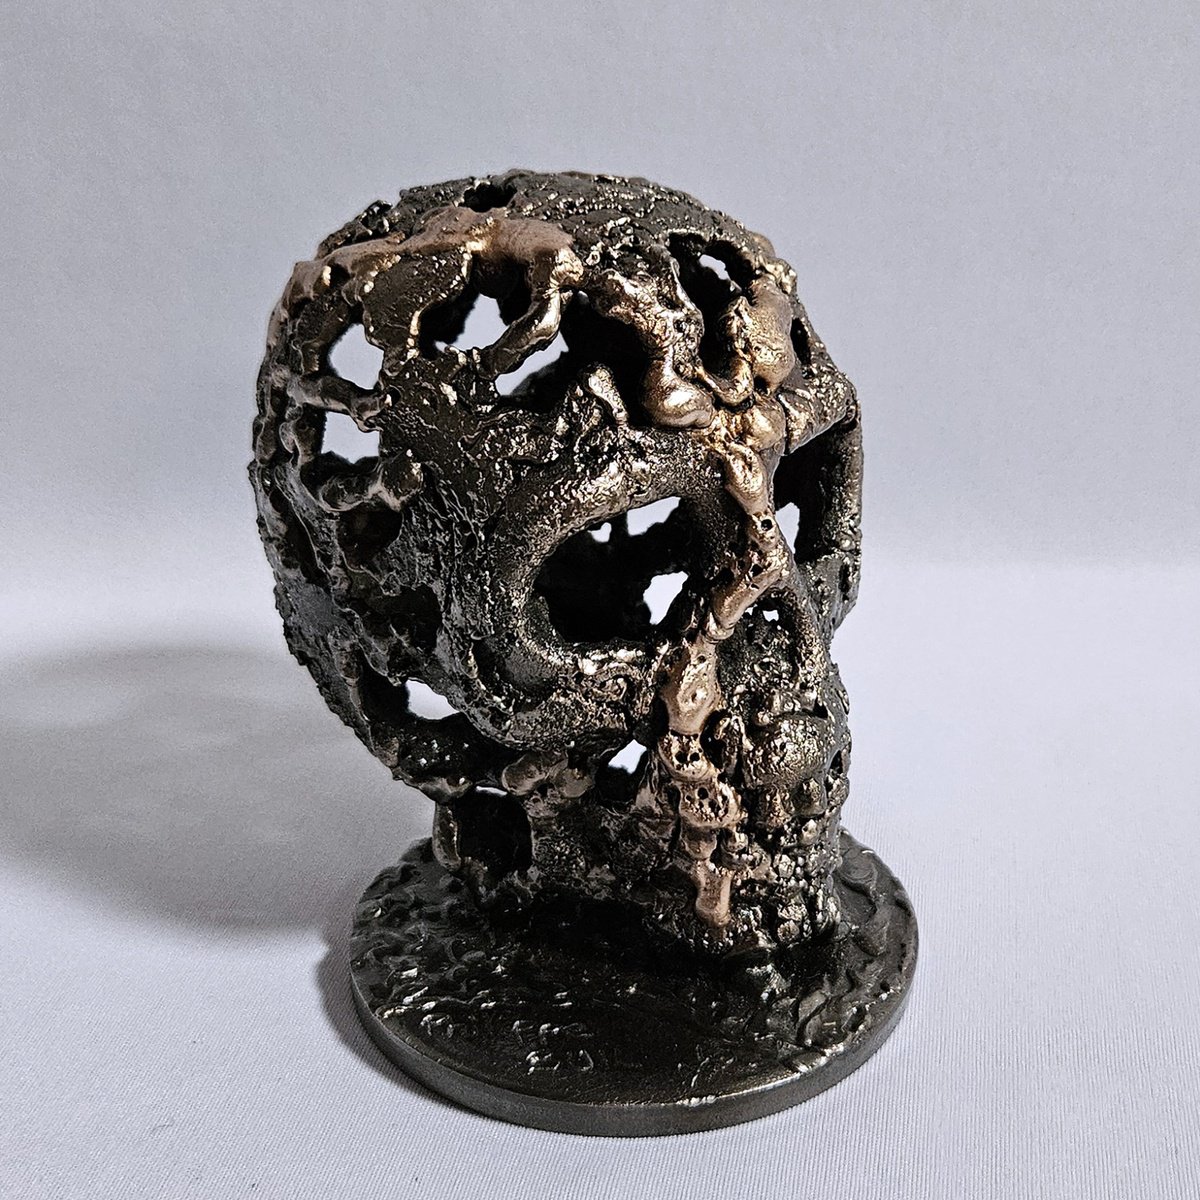 Skull 97-23 by Philippe Buil